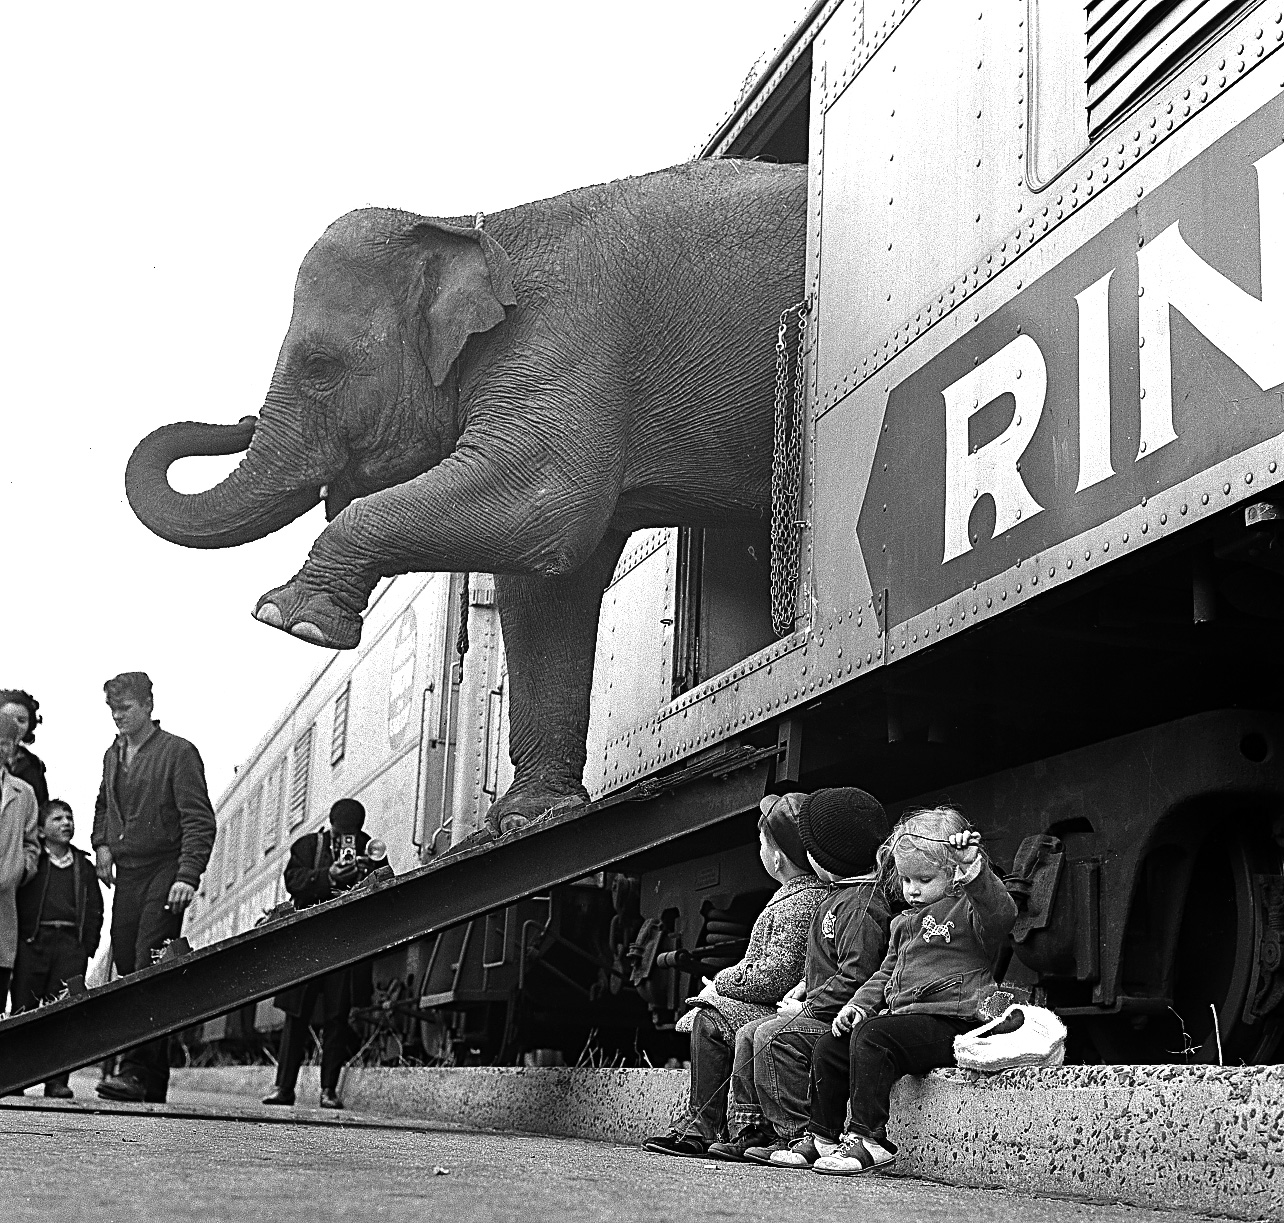 A Ringling Brothers Circus elephant walks out of a train car as young children watch in the Bronx railroad yard in New York City, April 1, 1963.  The circus opens in Madison Square Garden April 3 for a 40-day engagement.  (AP Photo)